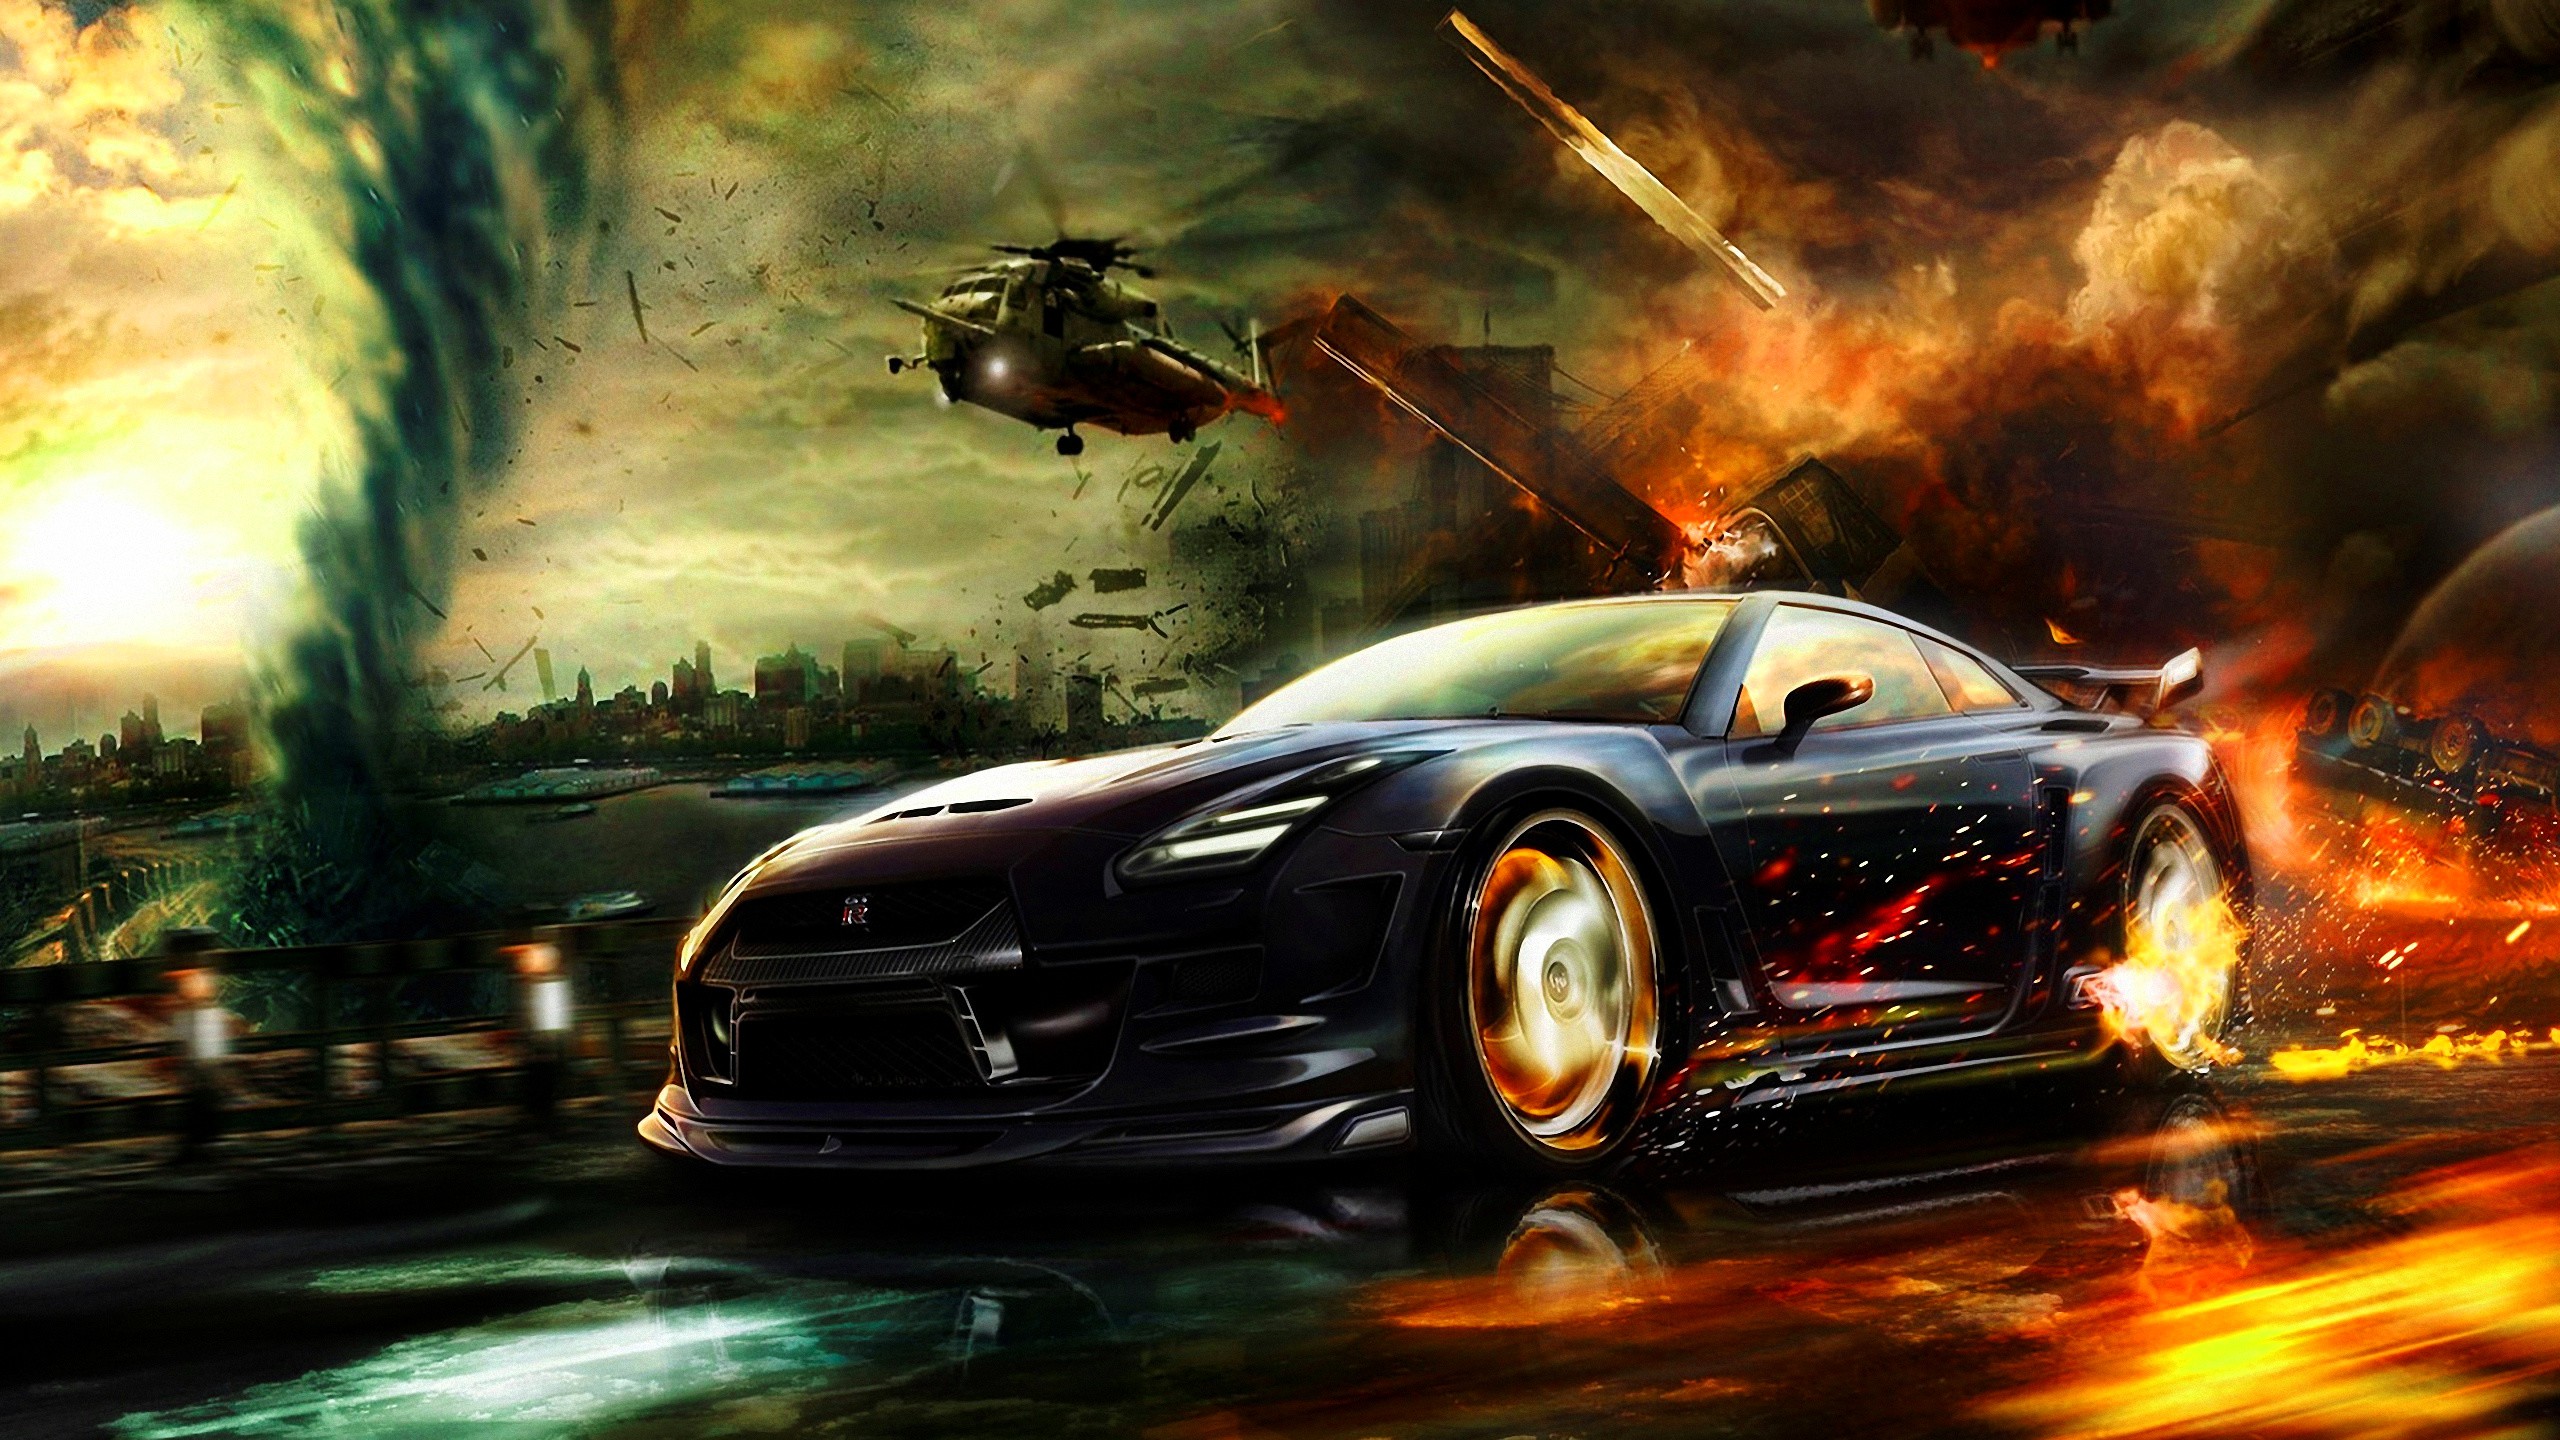 General 2560x1440 car vehicle Nissan GT-R backfire Nissan helicopters fire battle artwork photoshopped Japanese cars